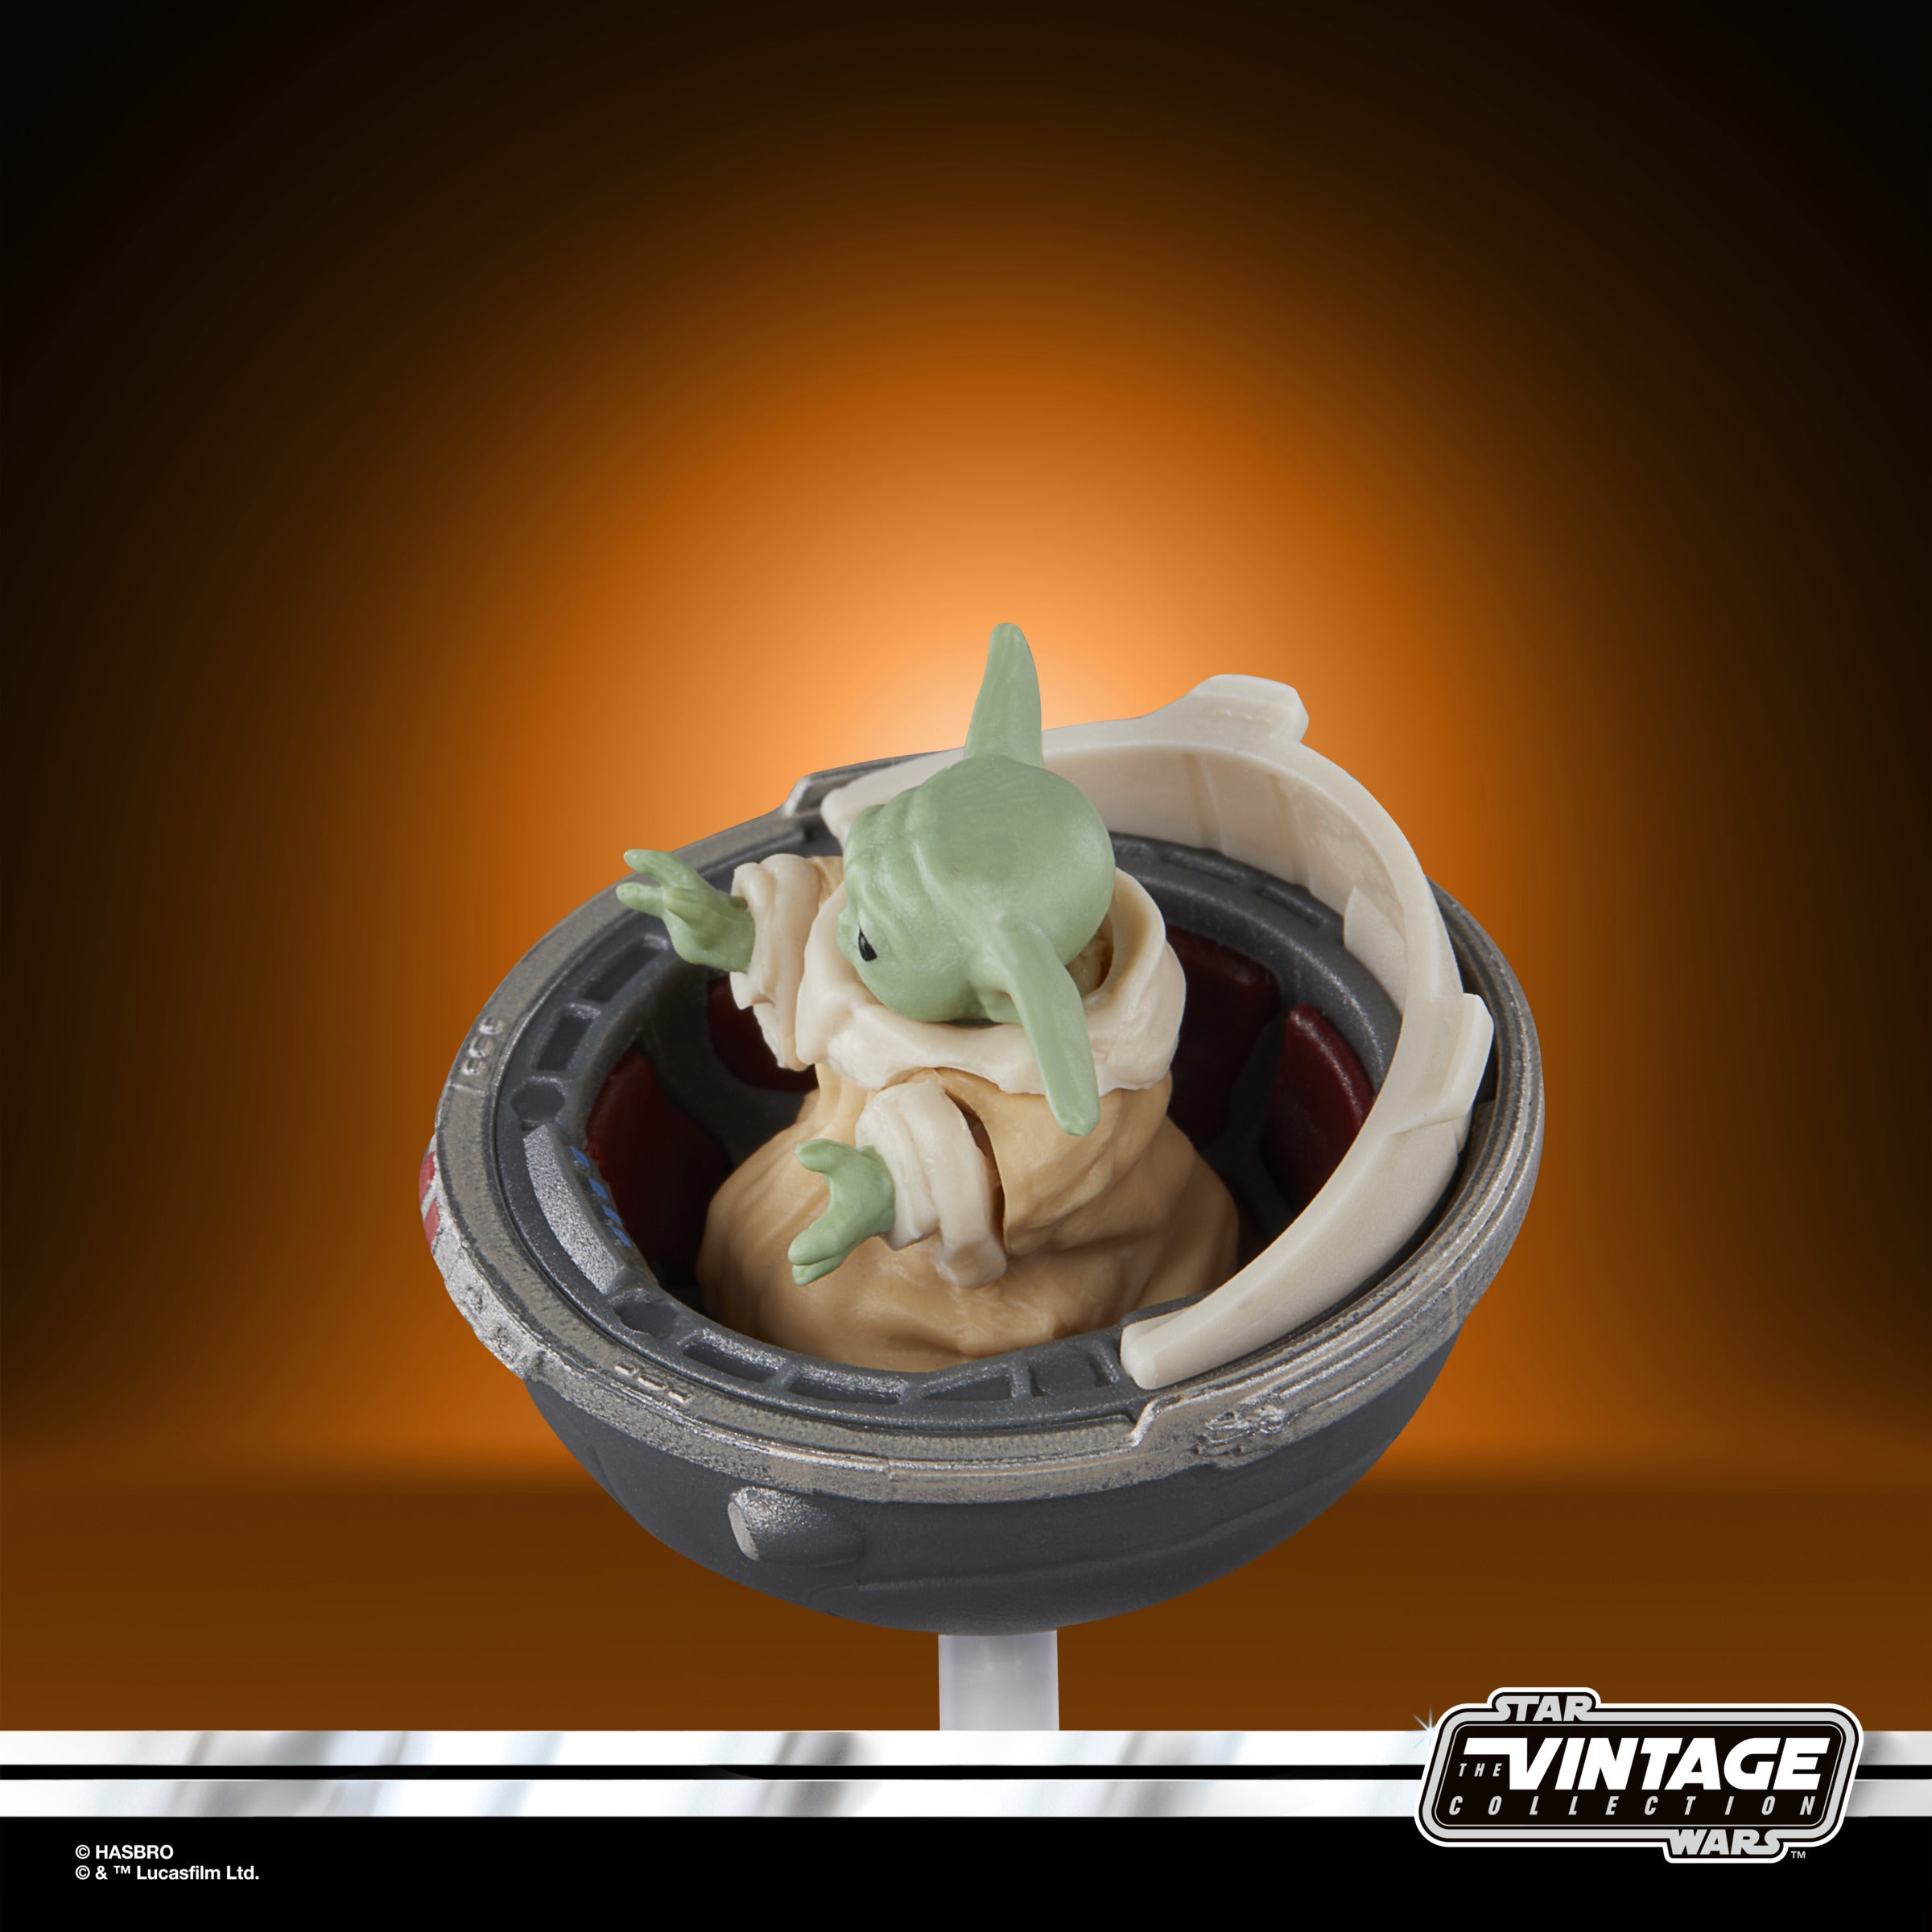 Star Wars The Vintage Collection: The Mandalorian - Grogu